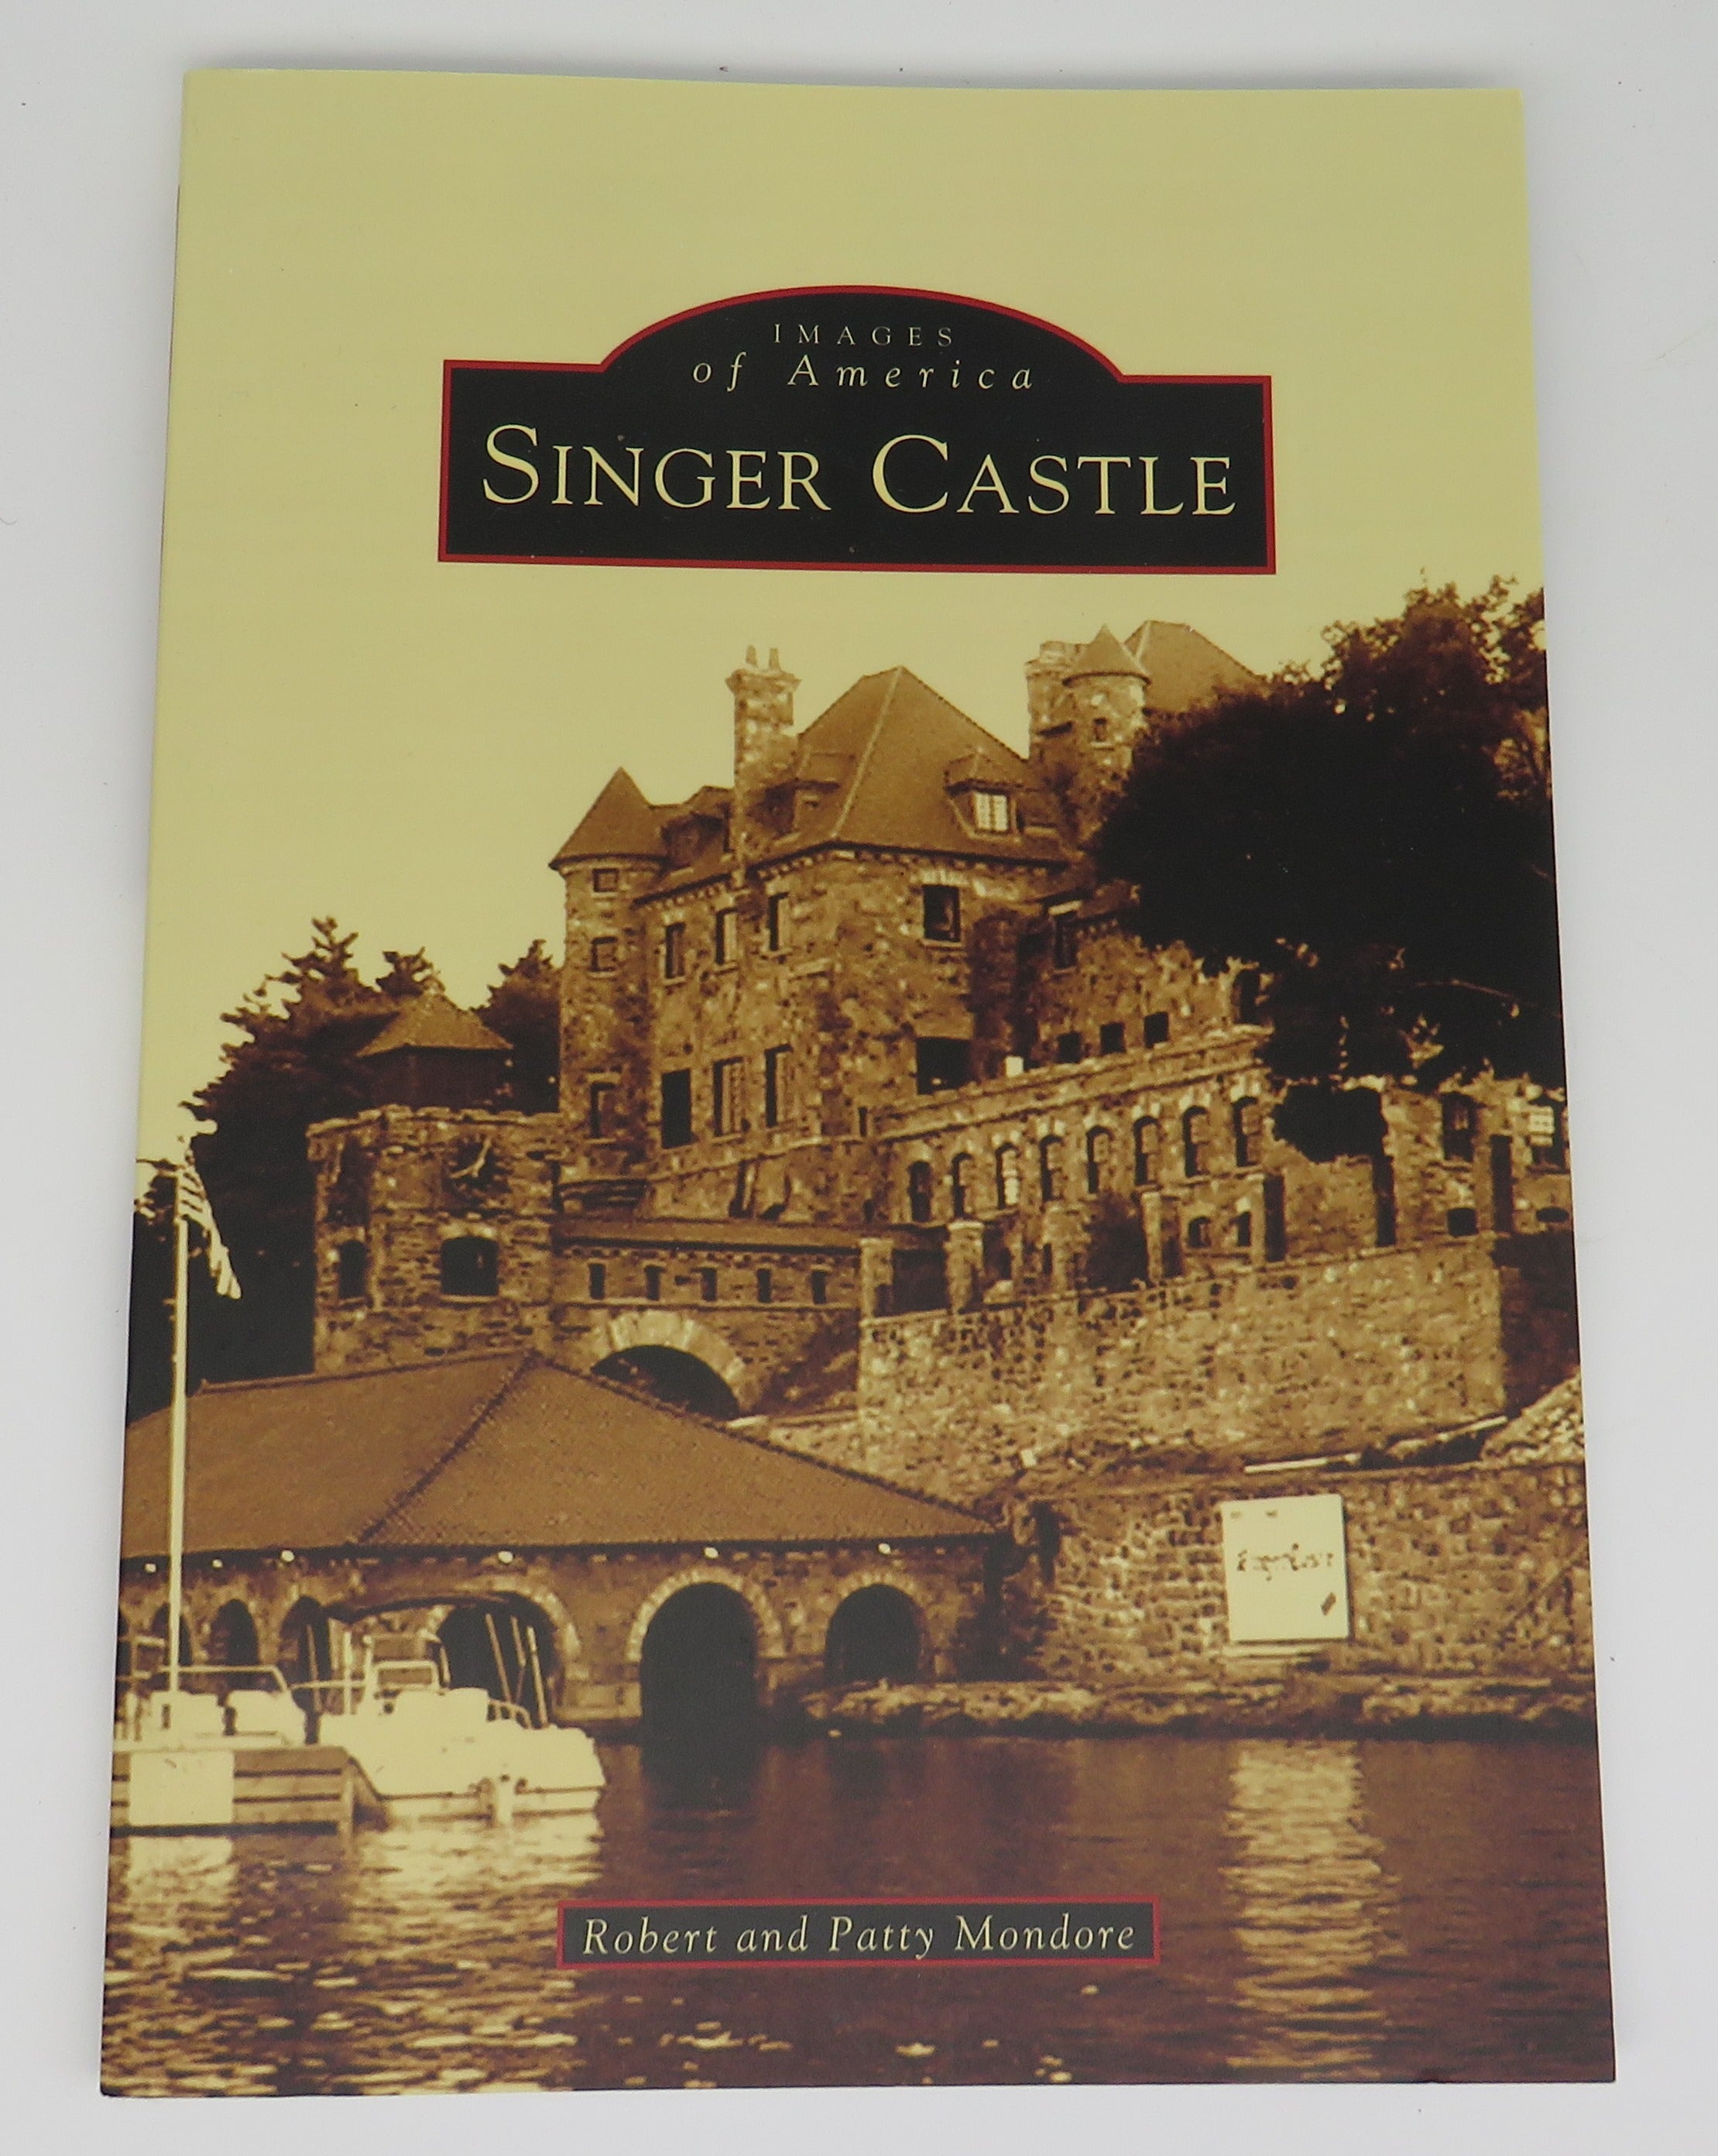 Images of America Singer Castle by Robert & Patty Mondore